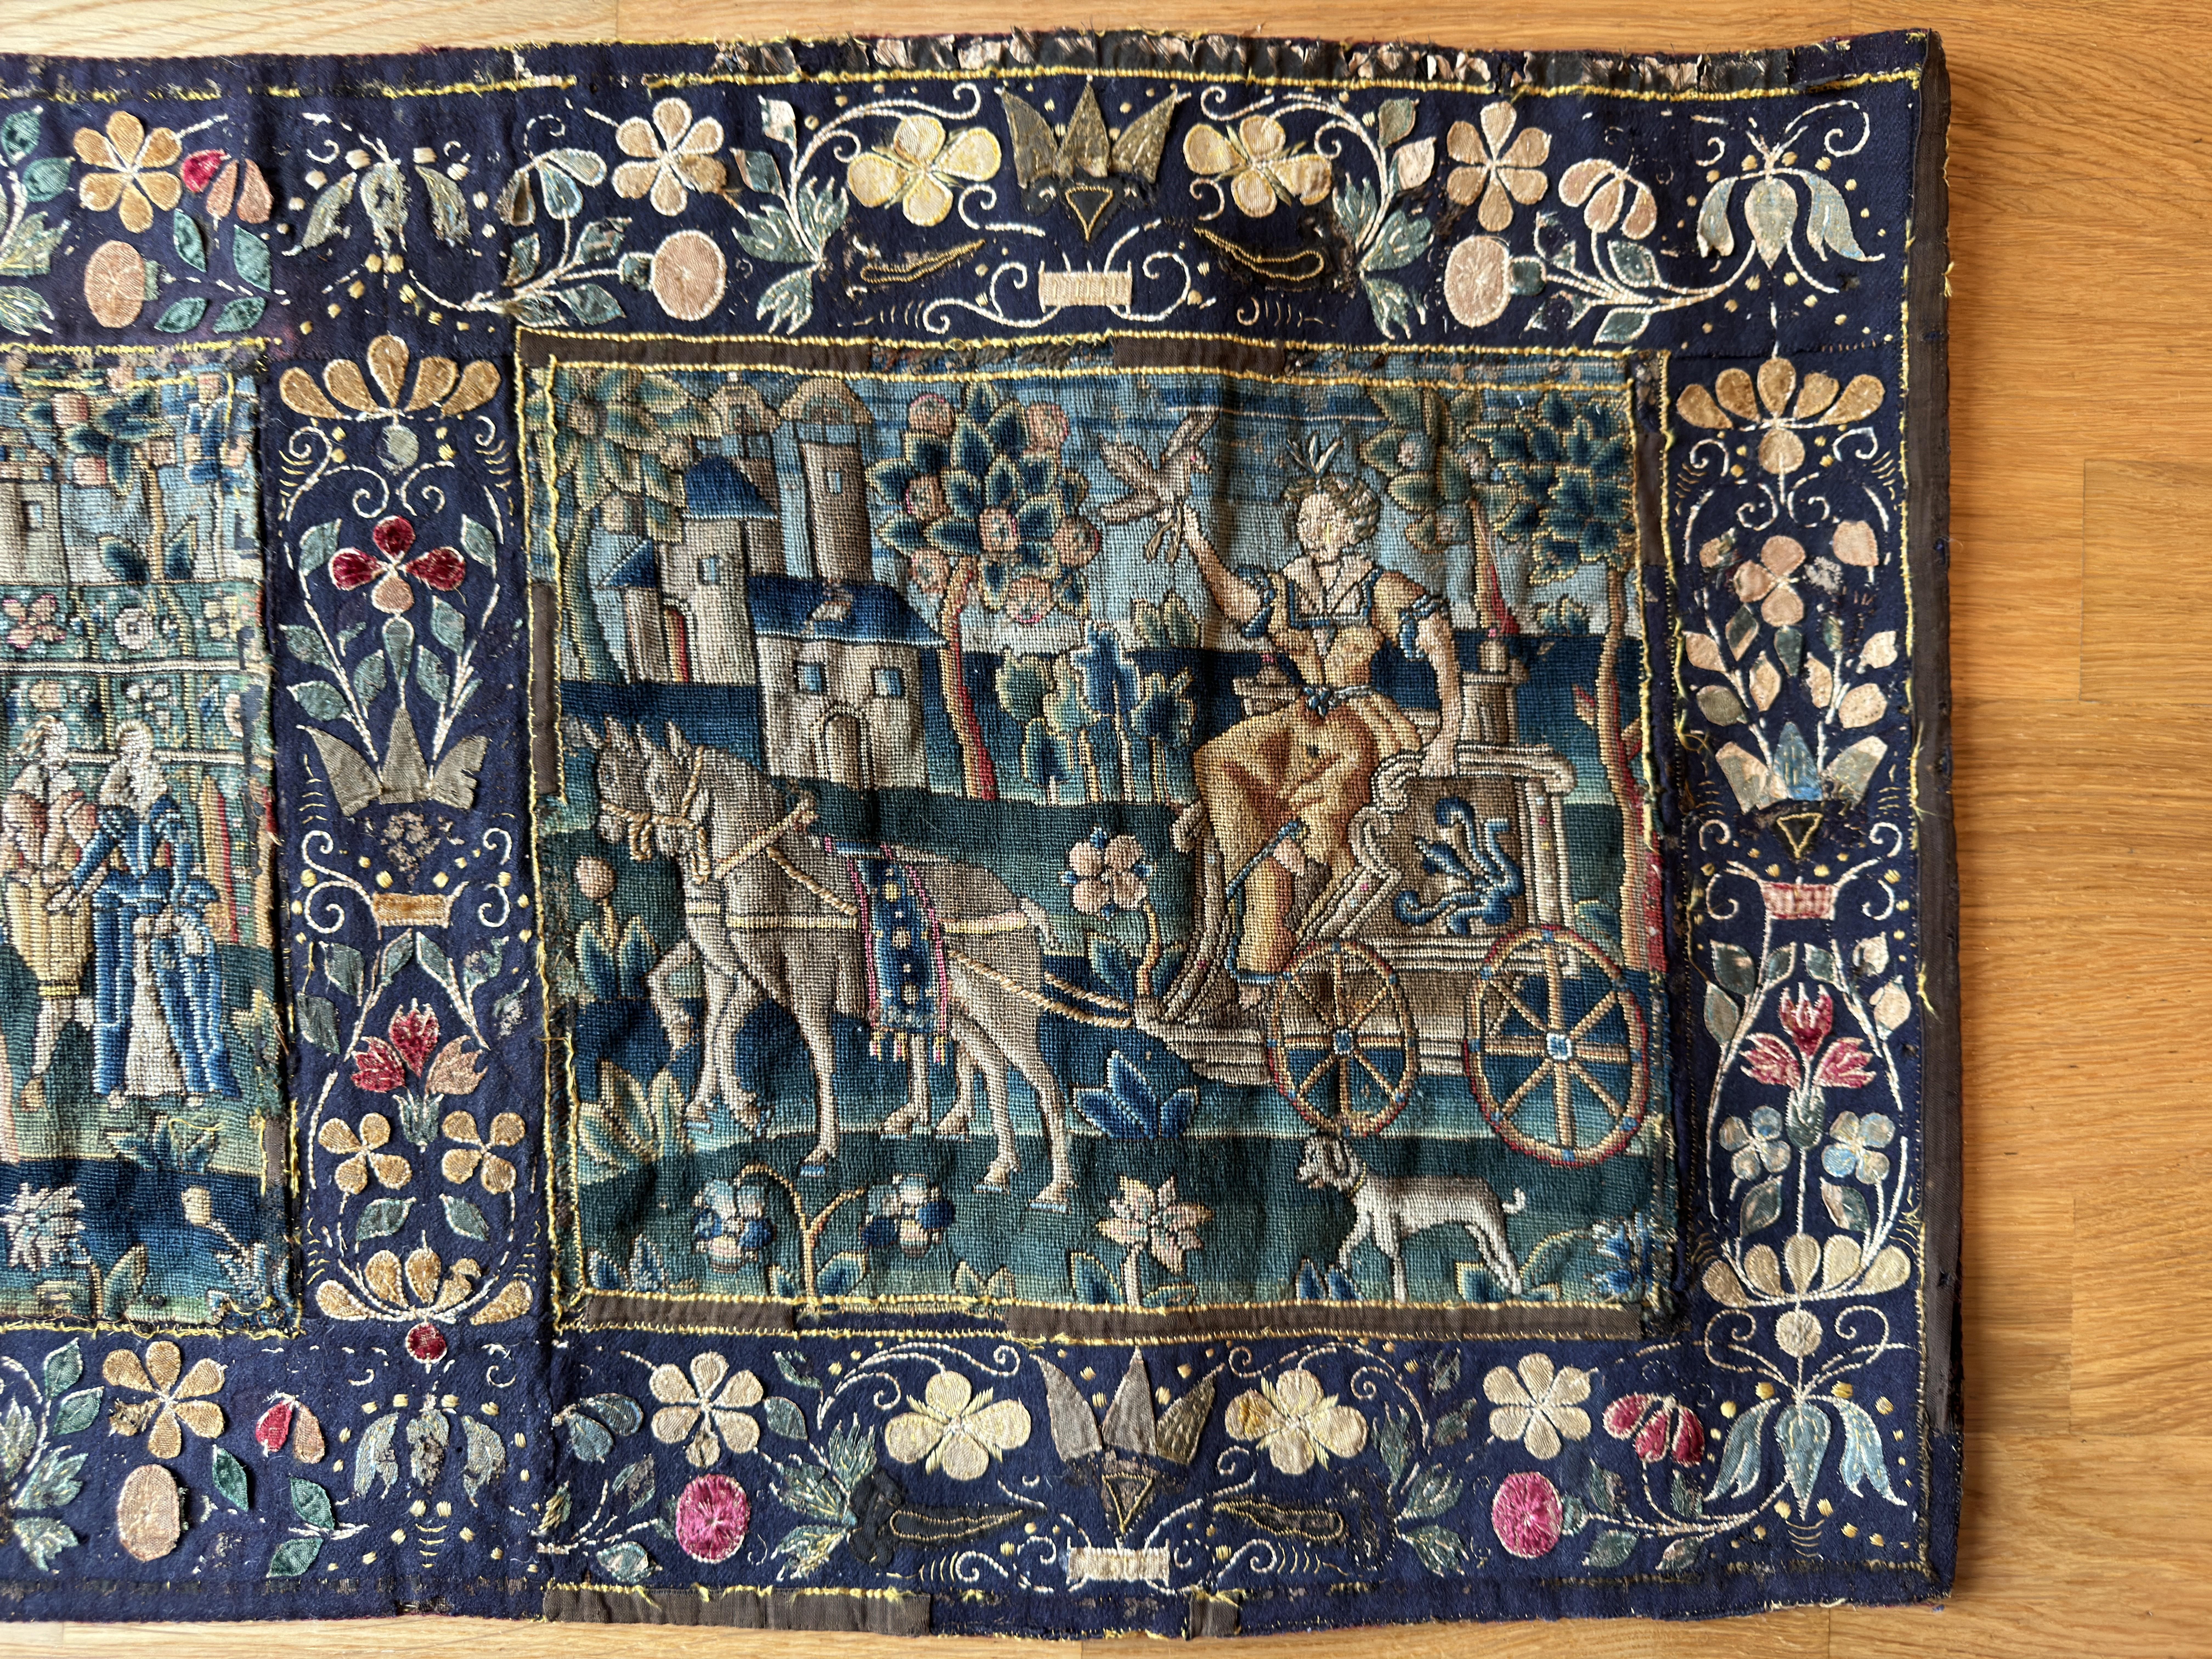 Hand-Woven 17th Century English Needlework Panel For Sale